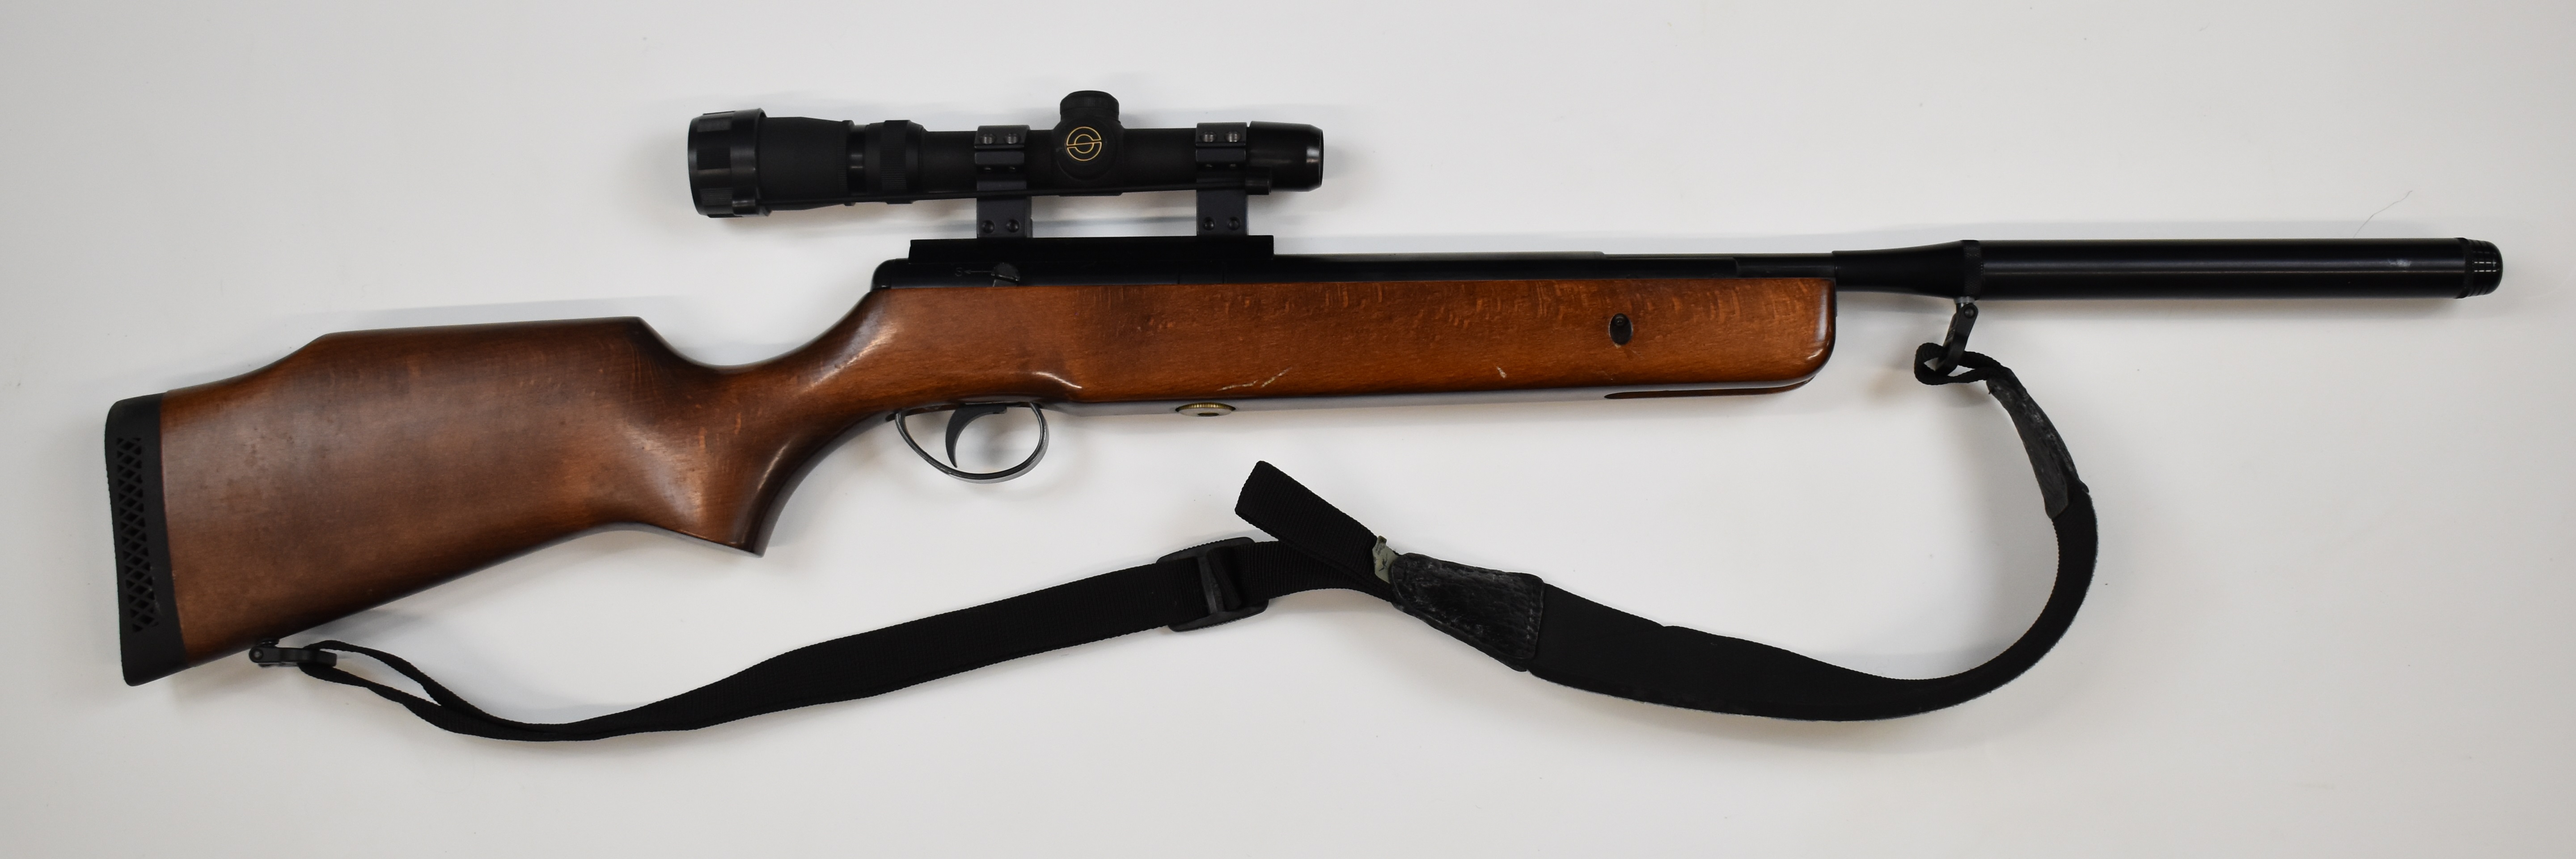 BSA Spitfire .22 air rifle with semi-pistol grip, raised cheek piece, sling, sound moderator and - Image 2 of 9